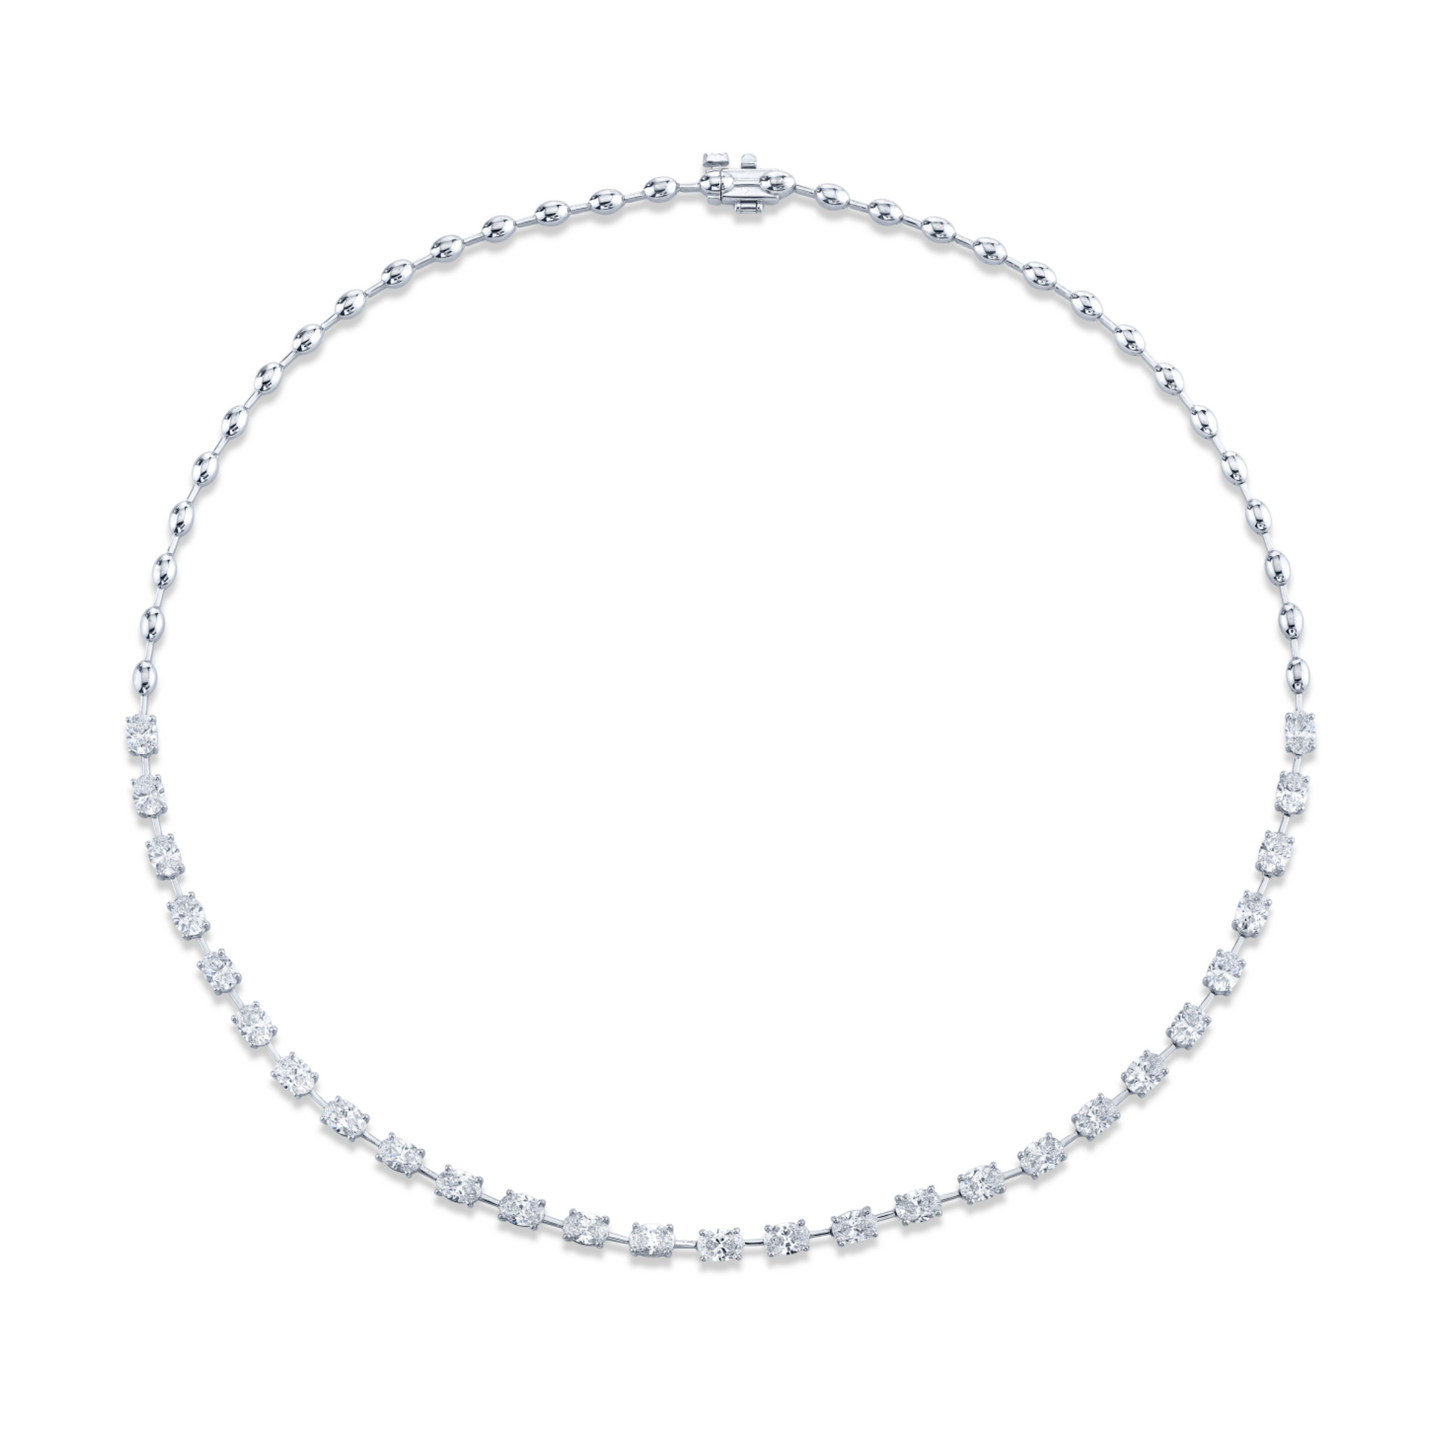 Candere Floating Hearts White Gold Necklace - CANDERE Floating Hearts White  Sone Ka Haar Price Starting From Rs 26,281 | Find Verified Sellers at  Justdial